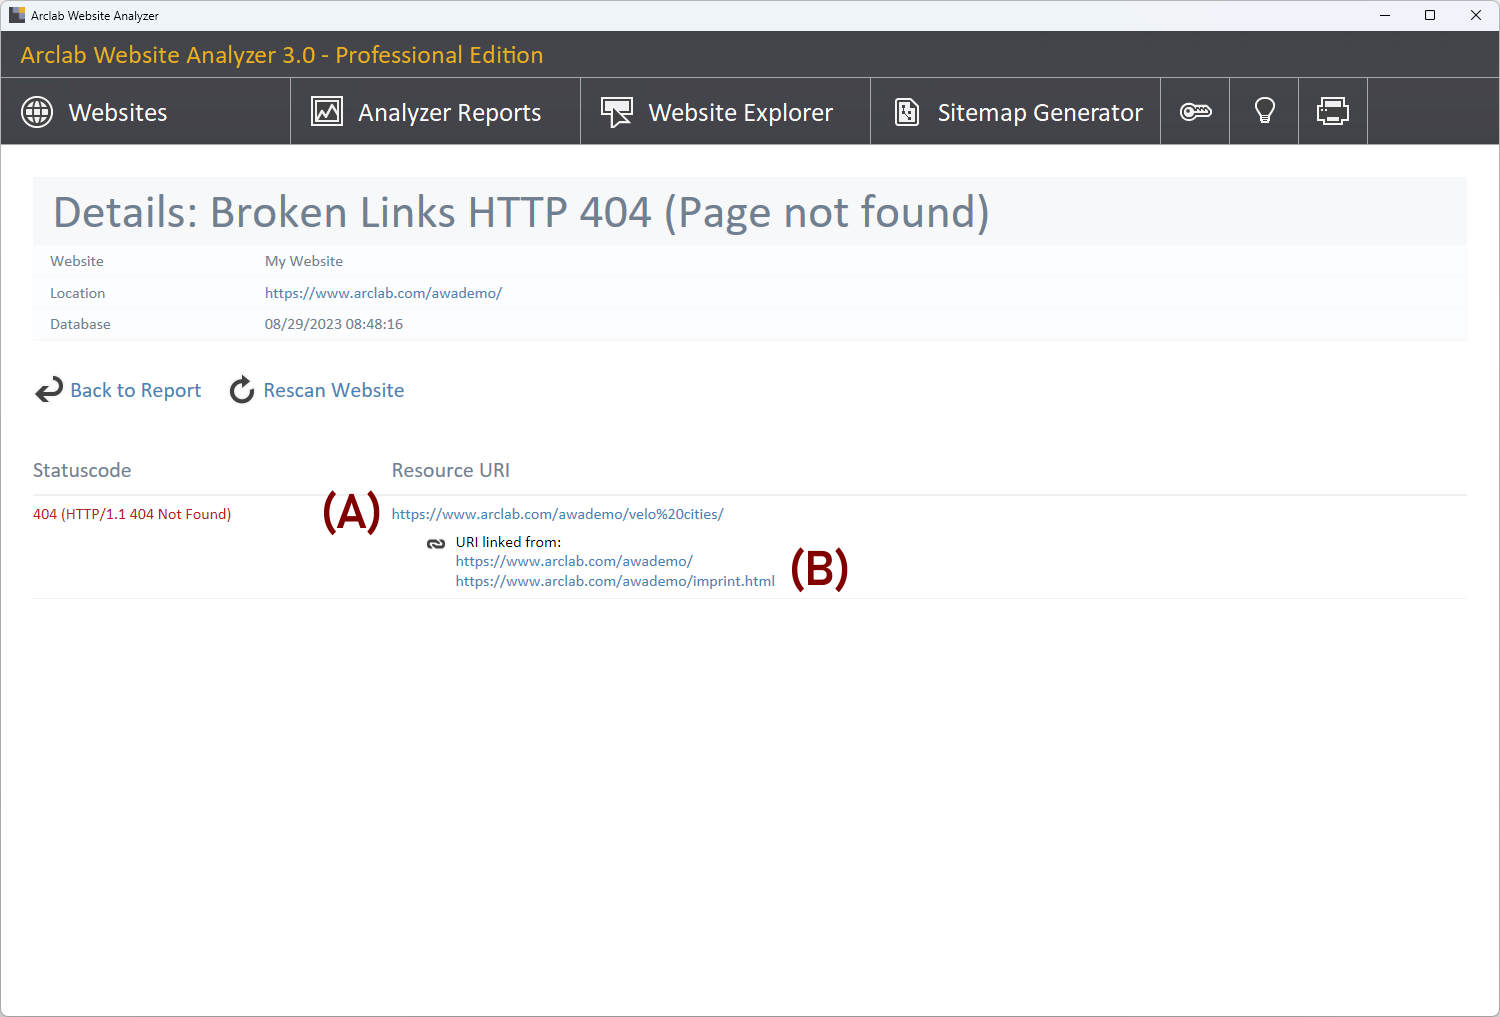 Details: Broken Links HTTP 404 (Page not found)